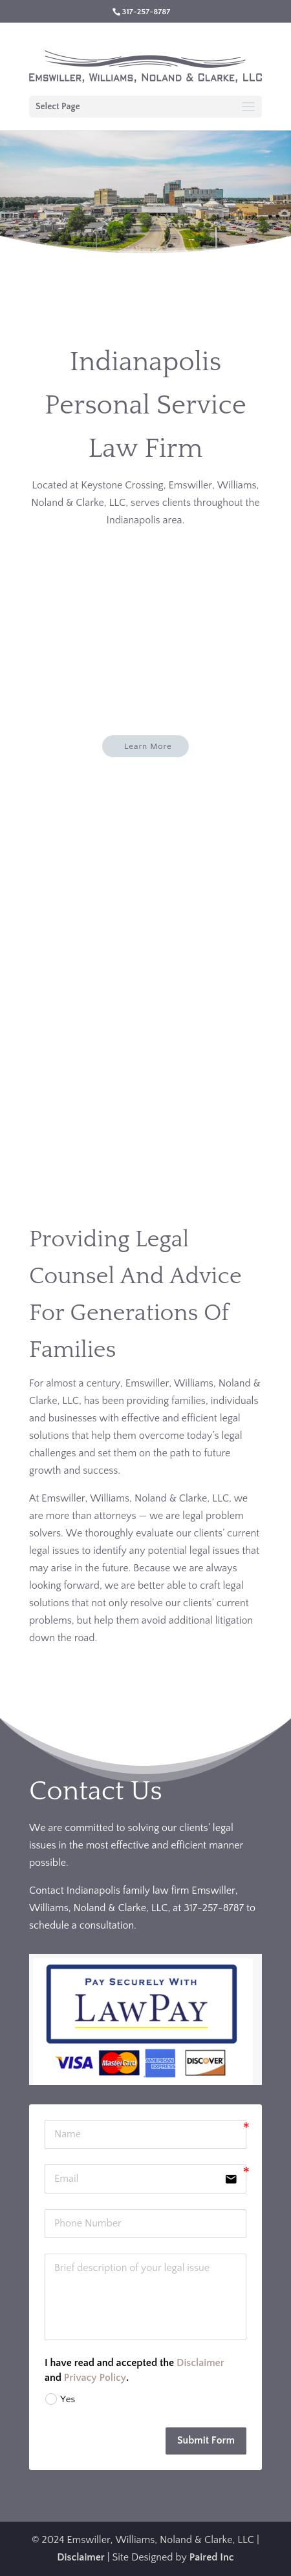 Emswiller, Williams, Noland & Clarke, P.C. - Indianapolis IN Lawyers